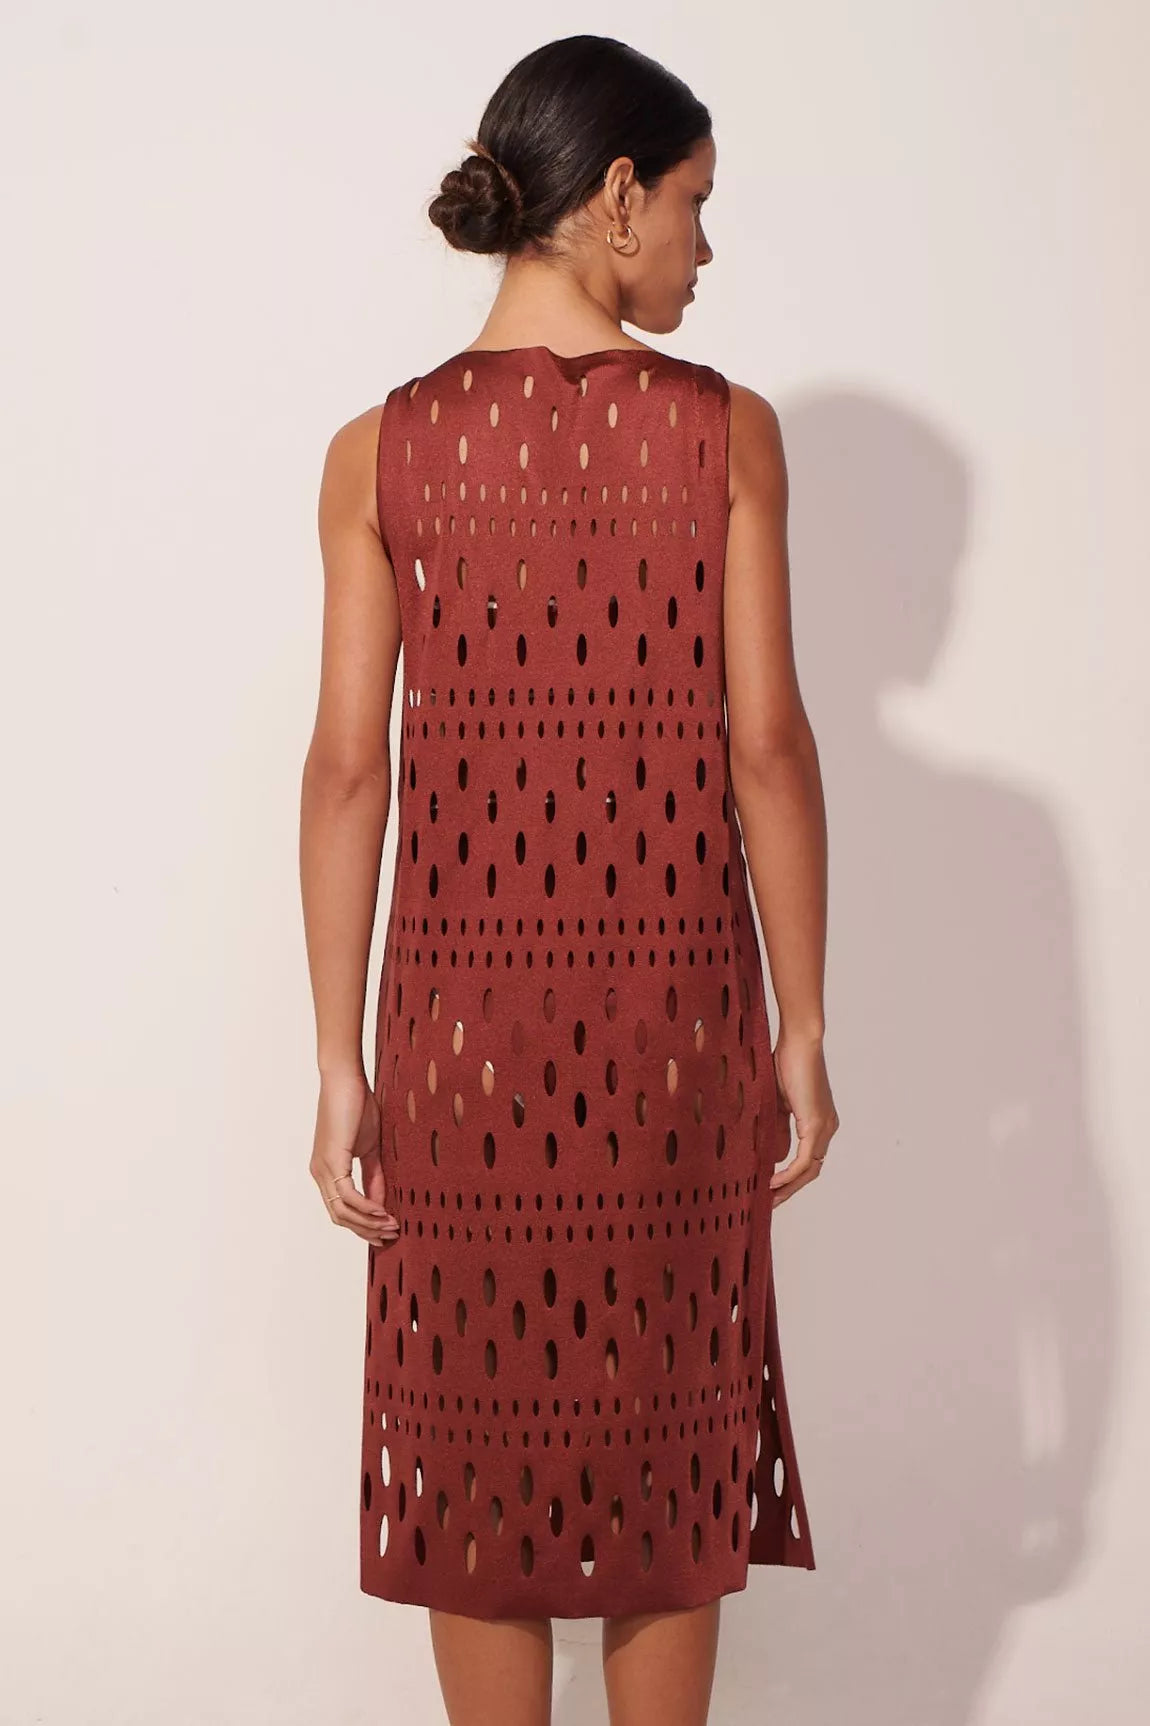 The Summer Dreammer Dress Red Wine - ANCORA